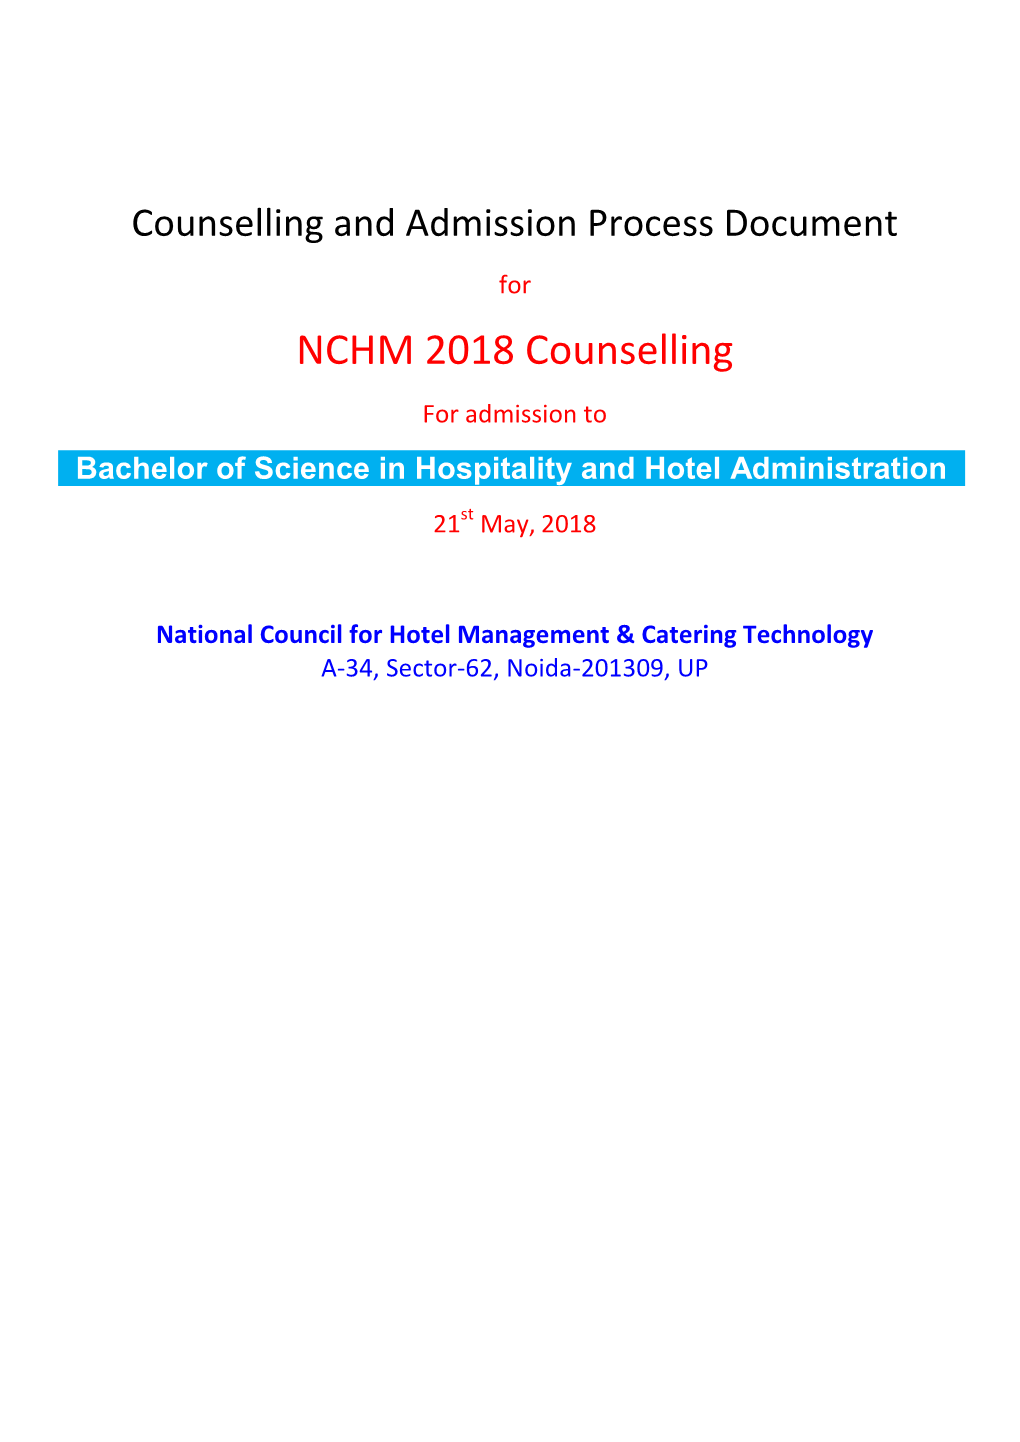 NCHM 2018 Counselling for Admission to Bachelor of Science in Hospitality and Hotel Administration 21St May, 2018